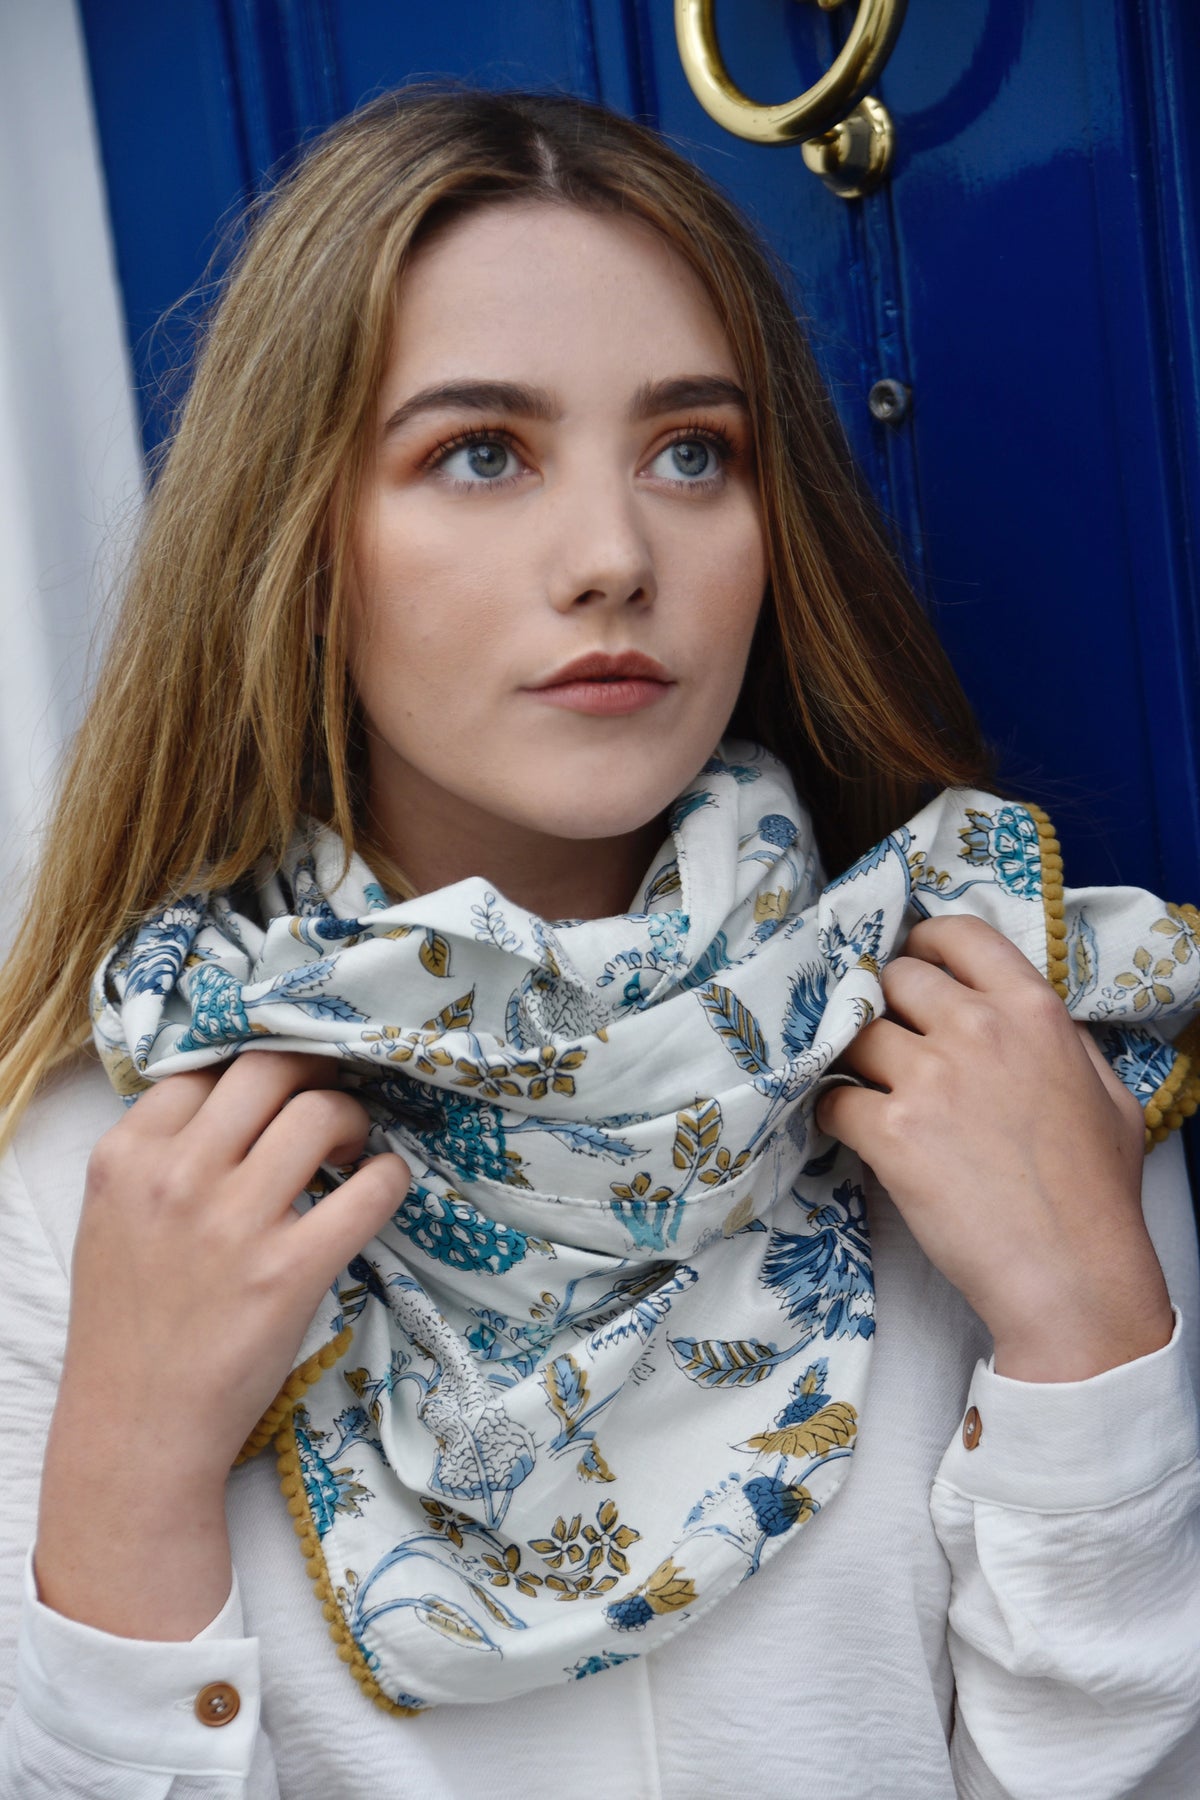 Blue and White Floral Scarf